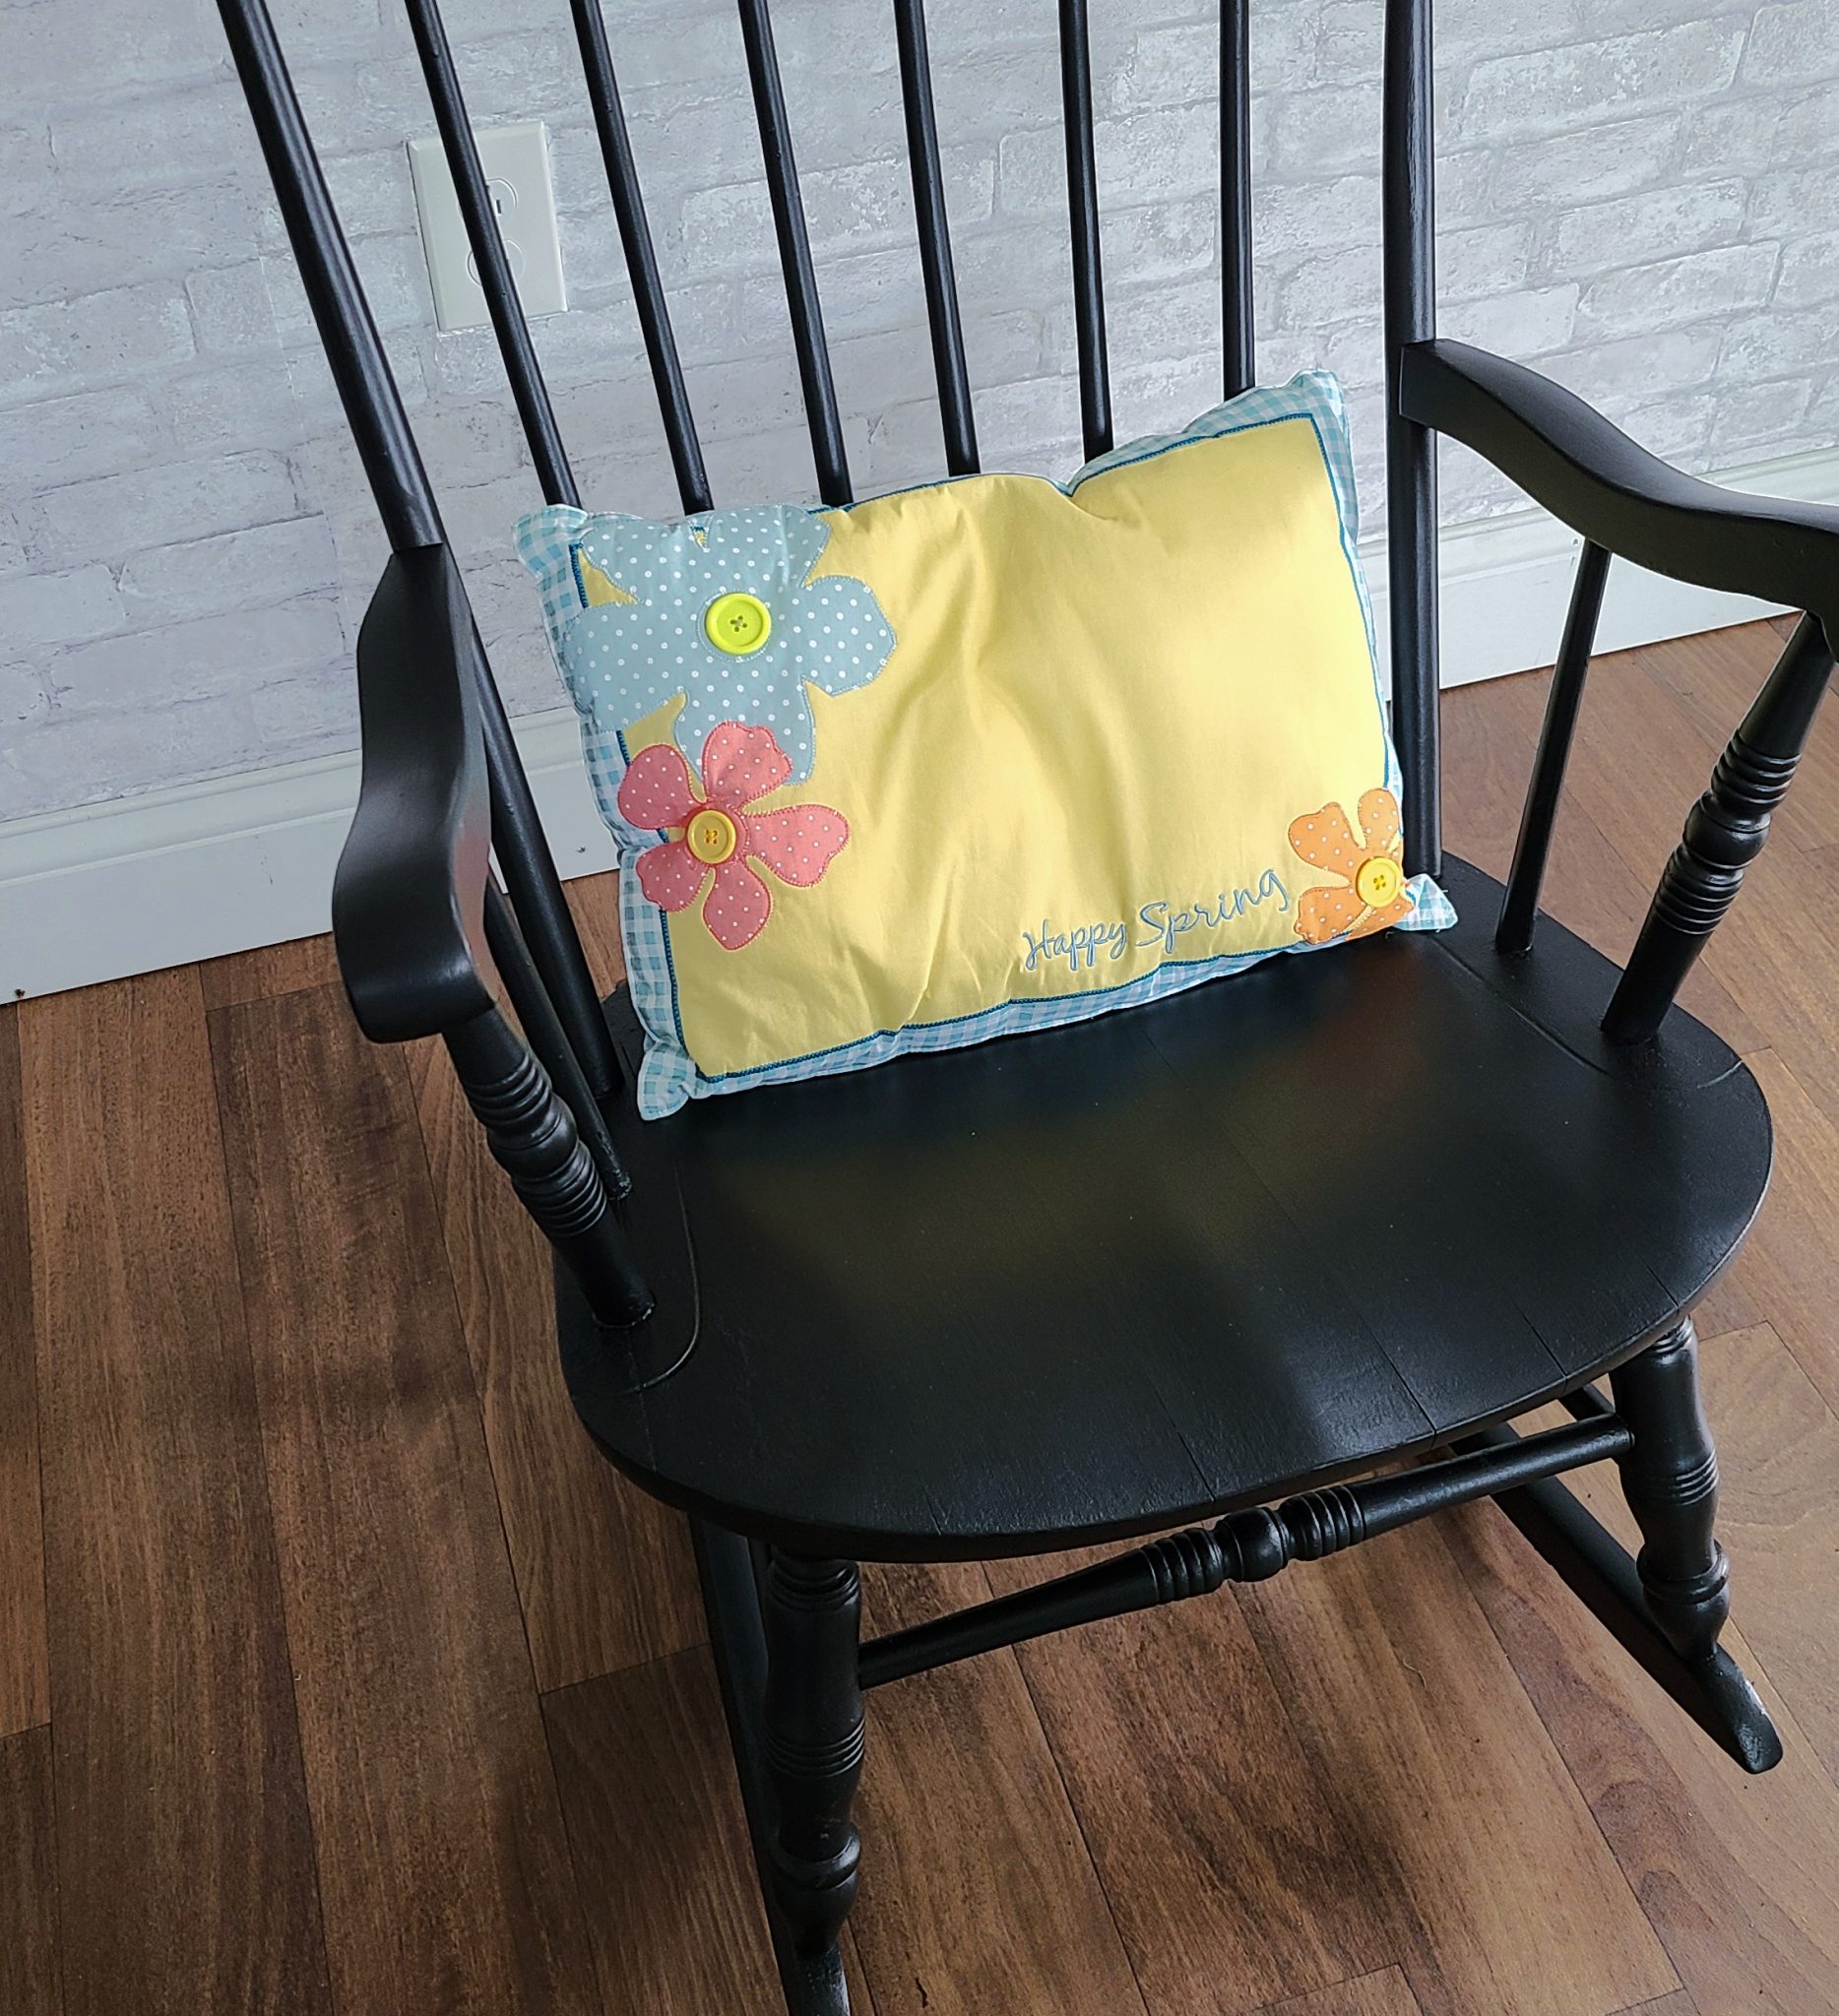 Wooden Rocking Chair Makeover - My Repurposed Life® Rescue Re-imagine